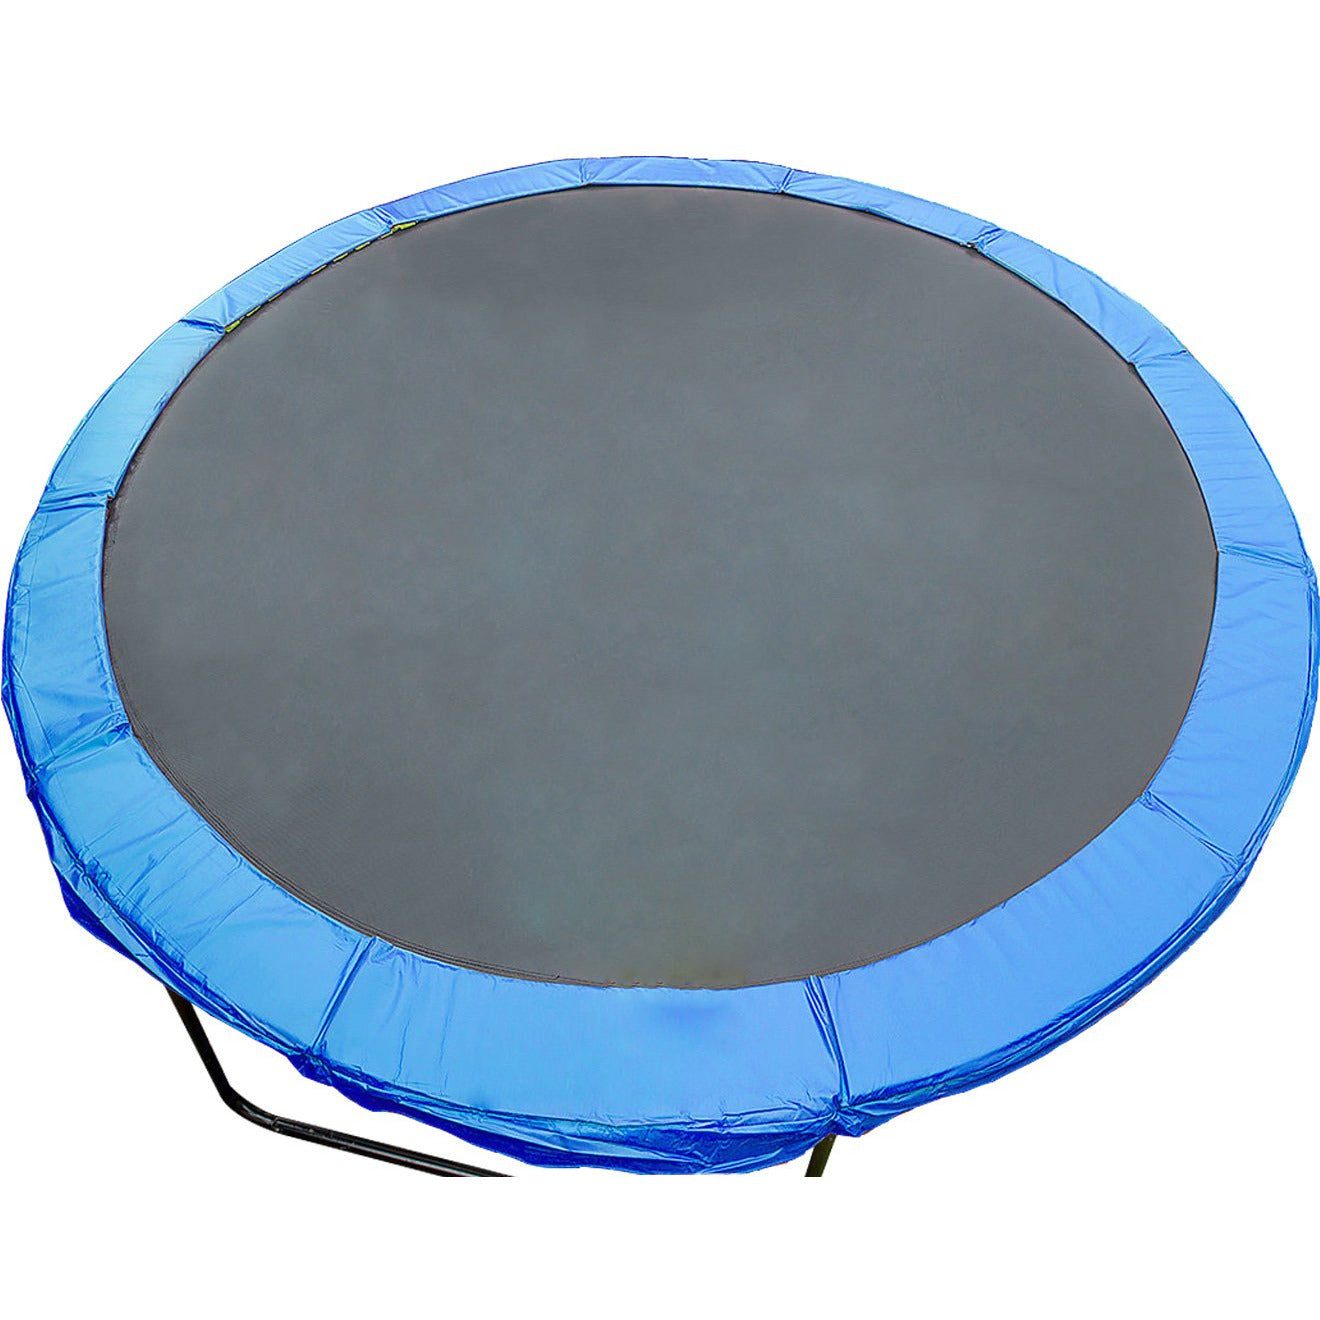 Kahuna 8ft Replacement Reinforced Outdoor Round Trampoline Safety Spring Pad Cover (16 Feet)